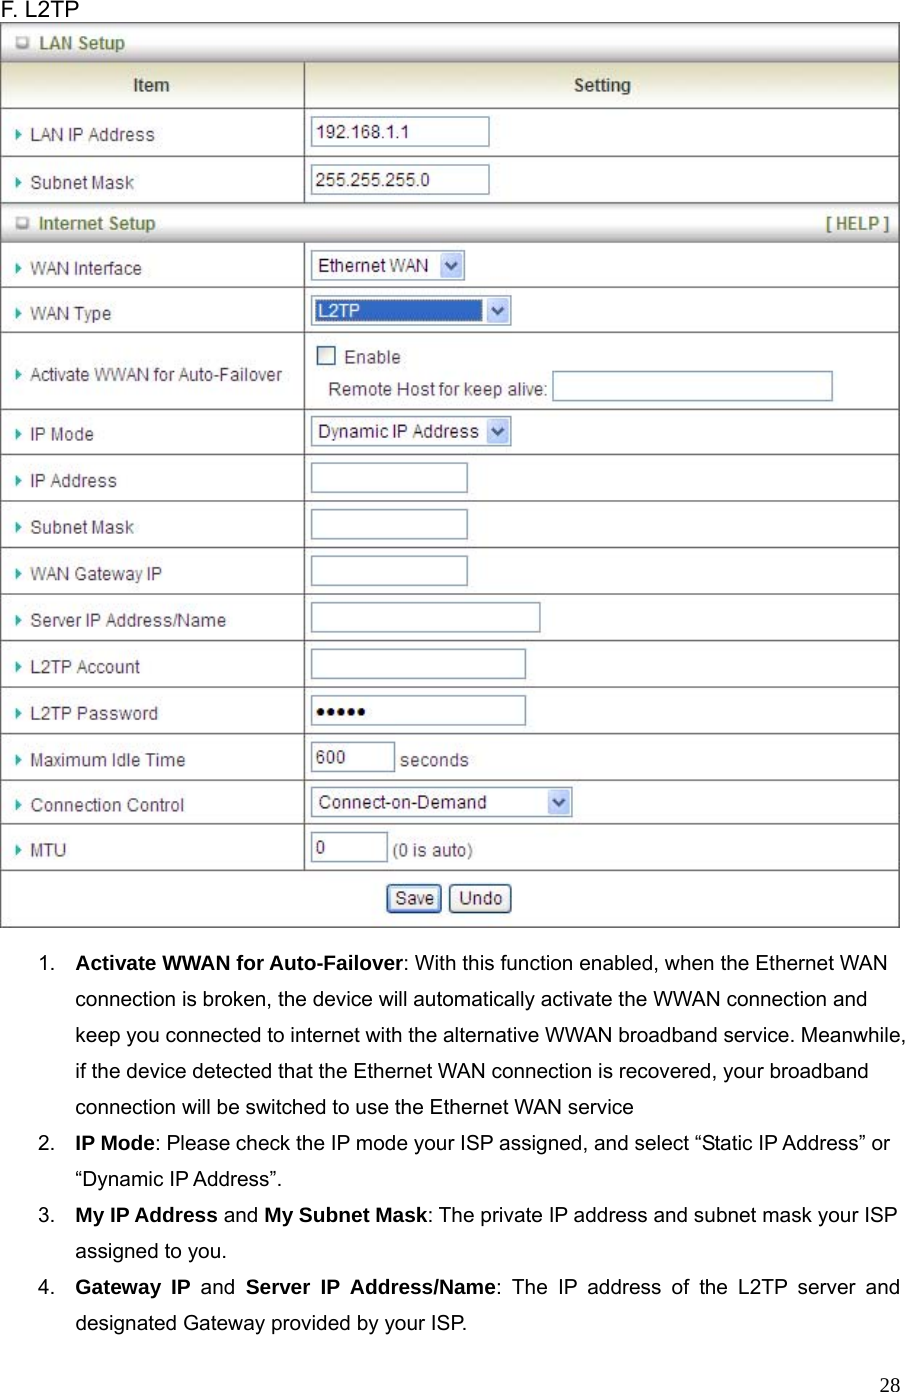  28 F. L2TP     1.  Activate WWAN for Auto-Failover: With this function enabled, when the Ethernet WAN connection is broken, the device will automatically activate the WWAN connection and keep you connected to internet with the alternative WWAN broadband service. Meanwhile, if the device detected that the Ethernet WAN connection is recovered, your broadband connection will be switched to use the Ethernet WAN service 2.  IP Mode: Please check the IP mode your ISP assigned, and select “Static IP Address” or “Dynamic IP Address”.   3.  My IP Address and My Subnet Mask: The private IP address and subnet mask your ISP assigned to you.   4.  Gateway IP and Server IP Address/Name: The IP address of the L2TP server and designated Gateway provided by your ISP. 